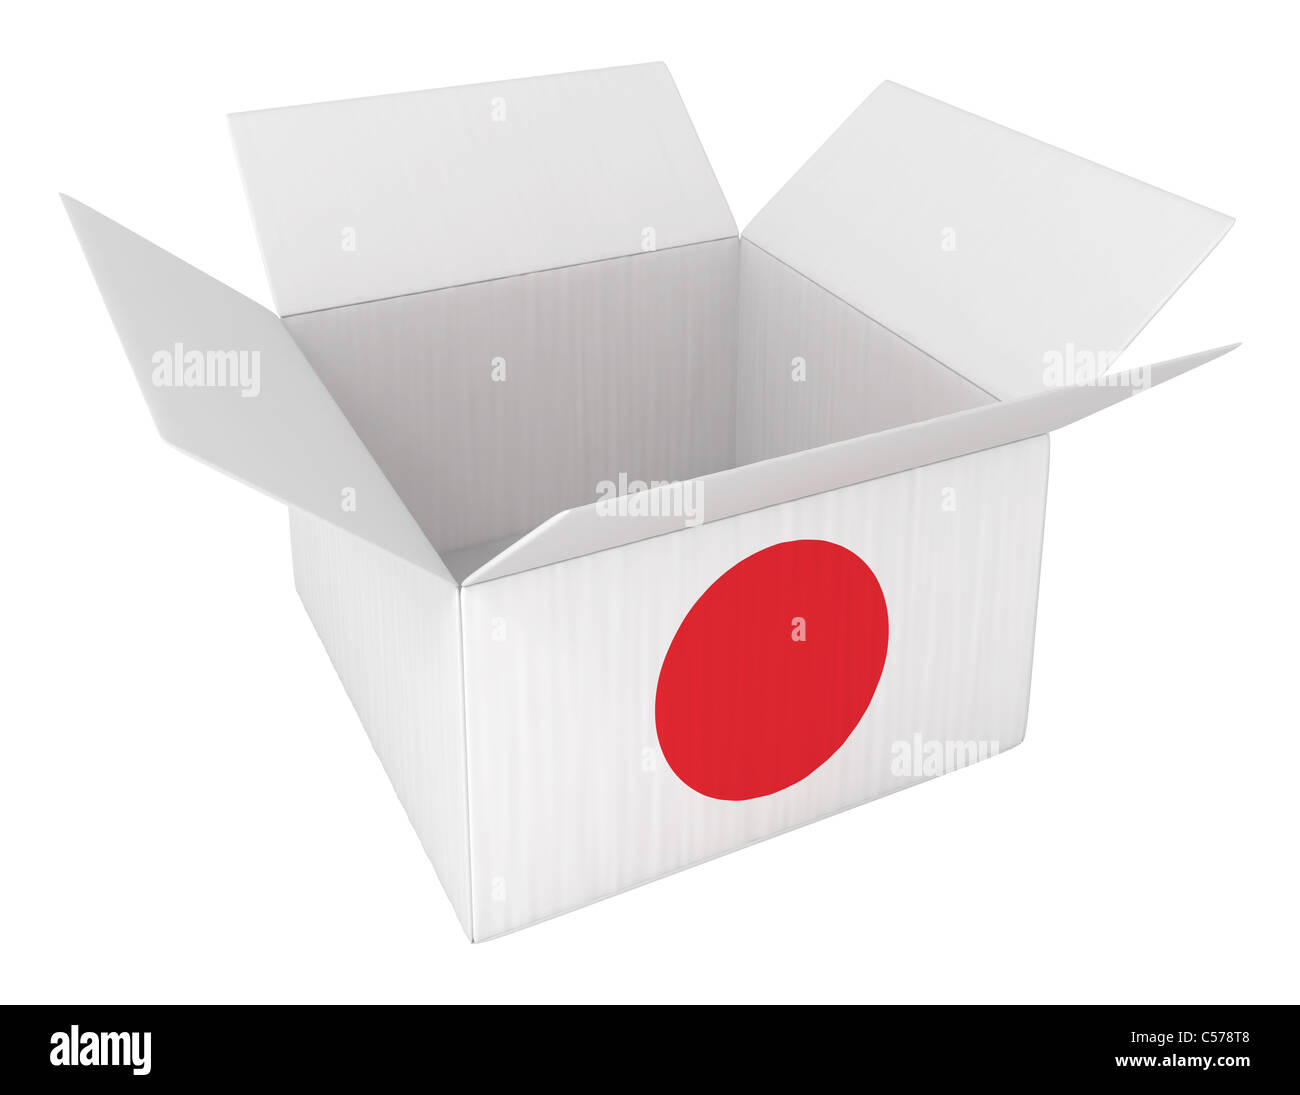 Made in Japan box container isolated on white Stock Photo